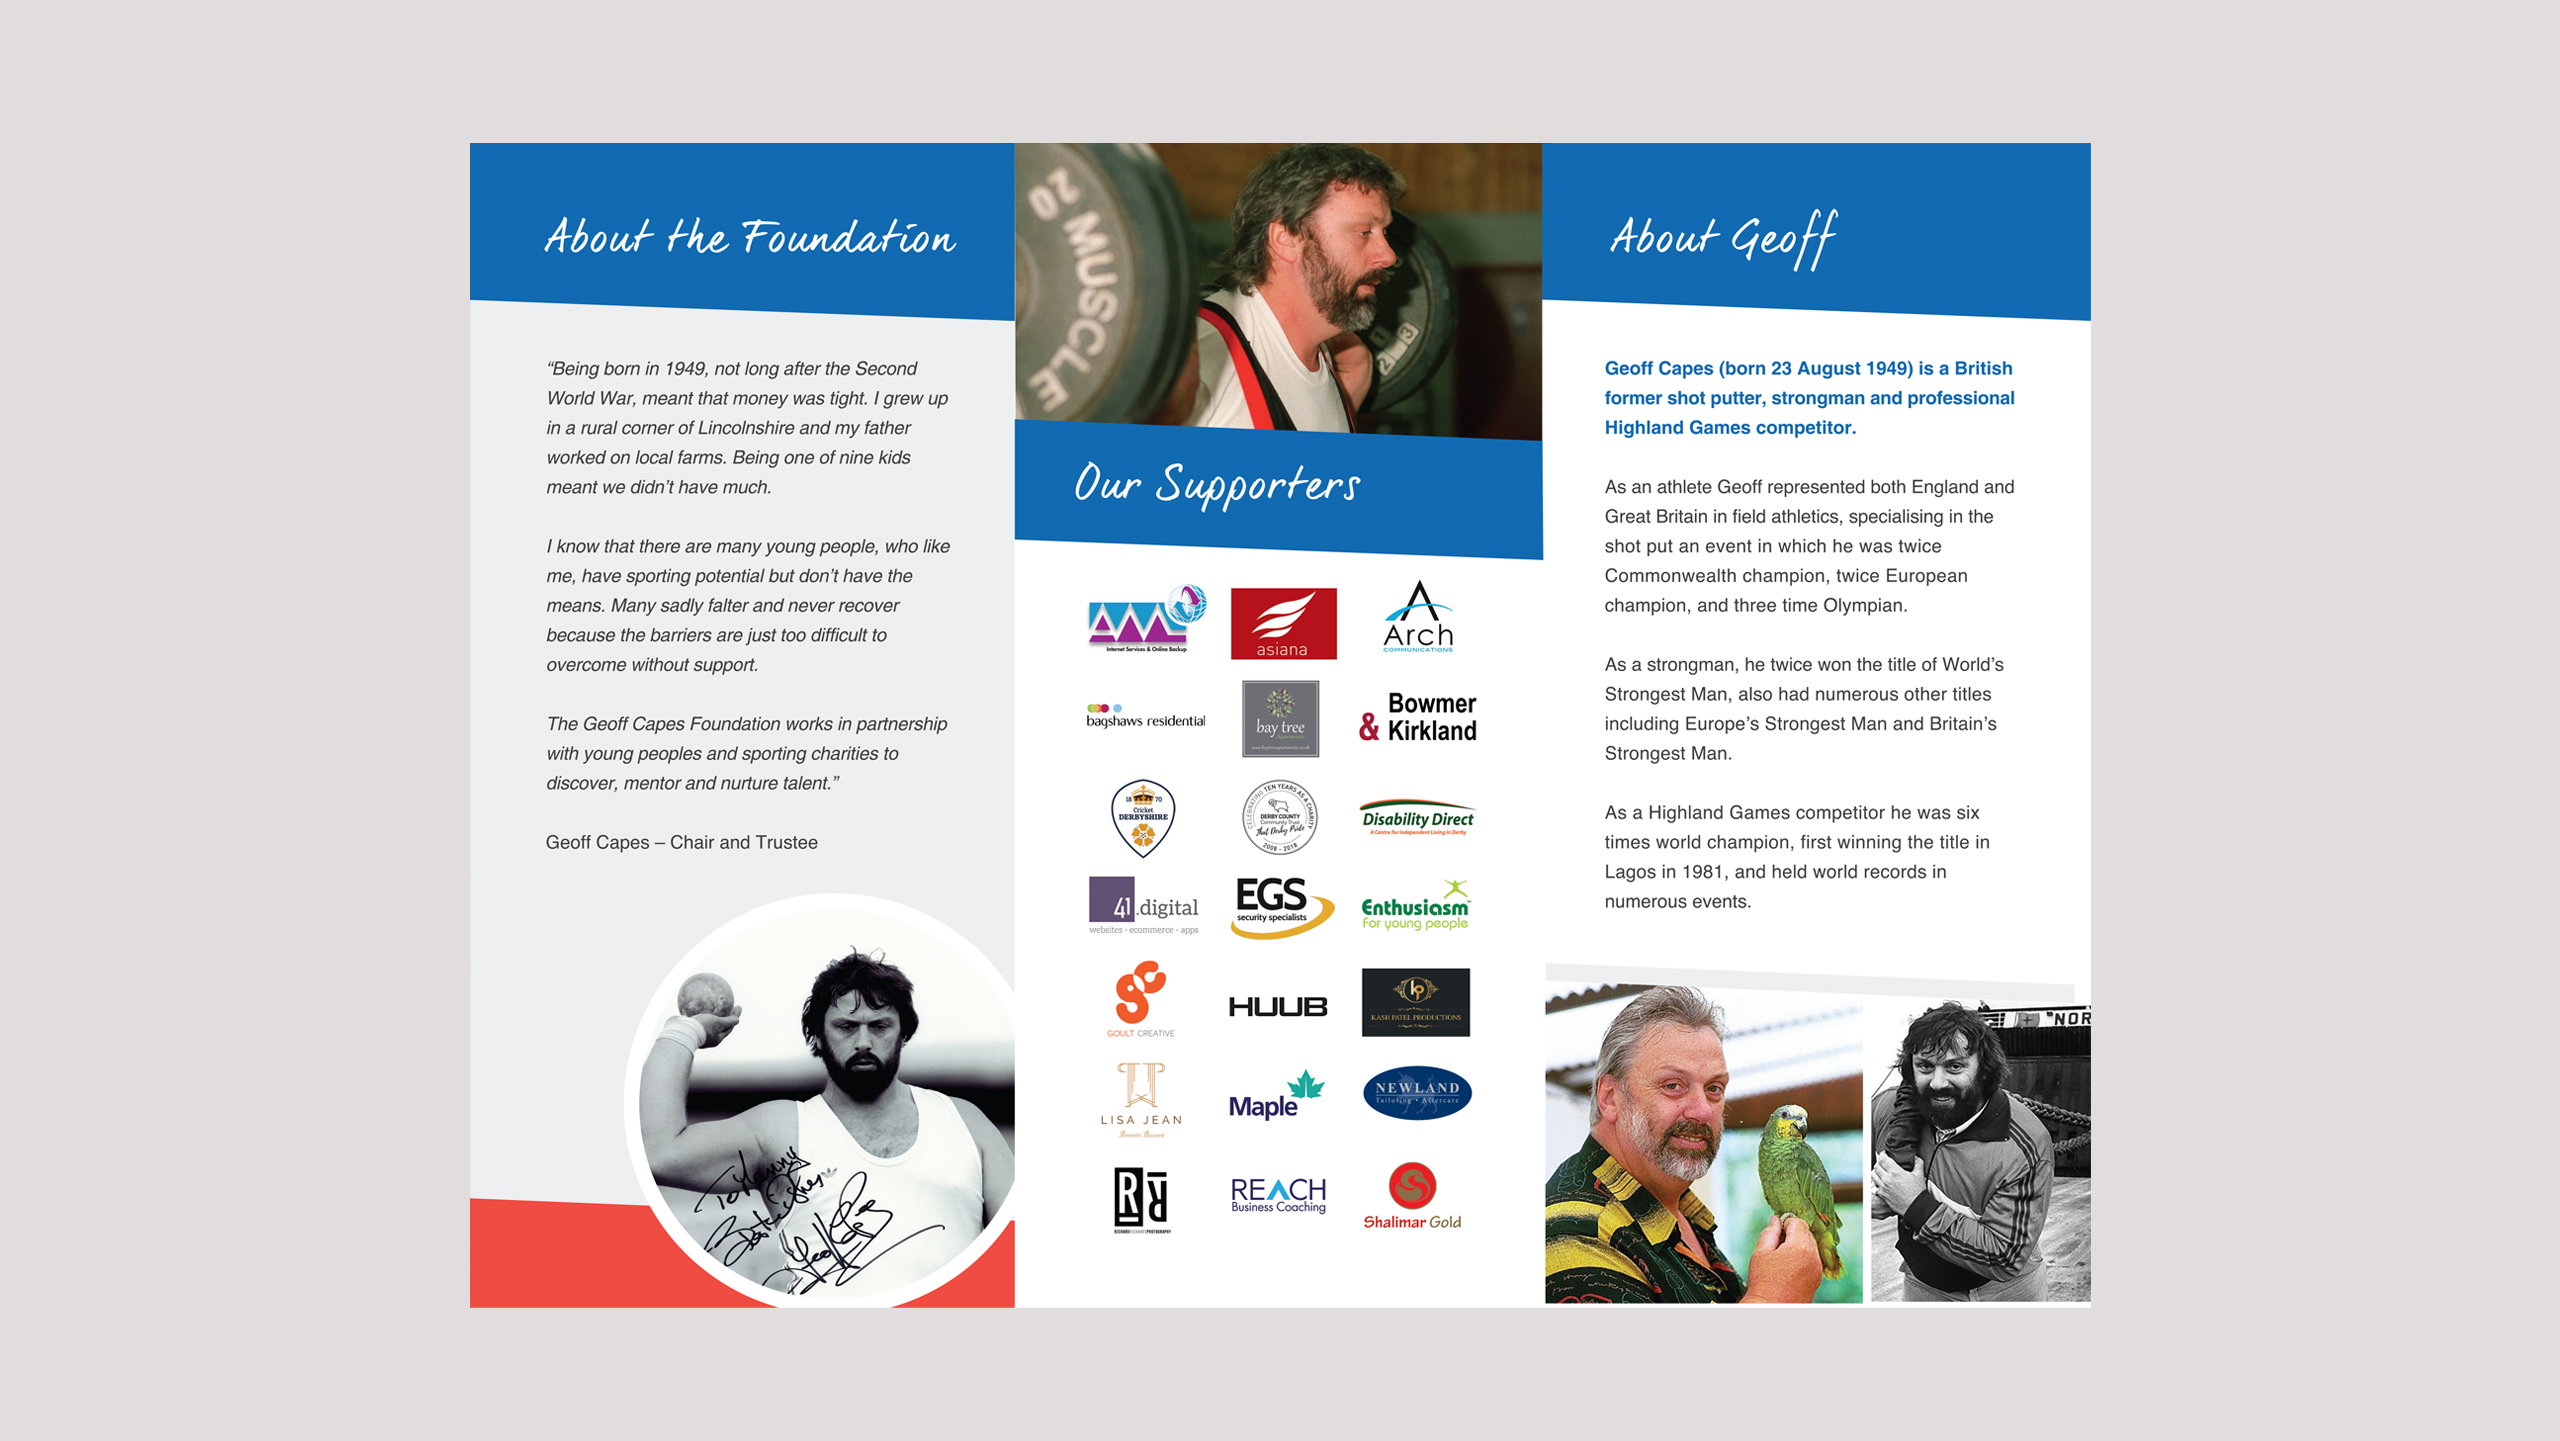 GEOFF CAPES FOUNDATION